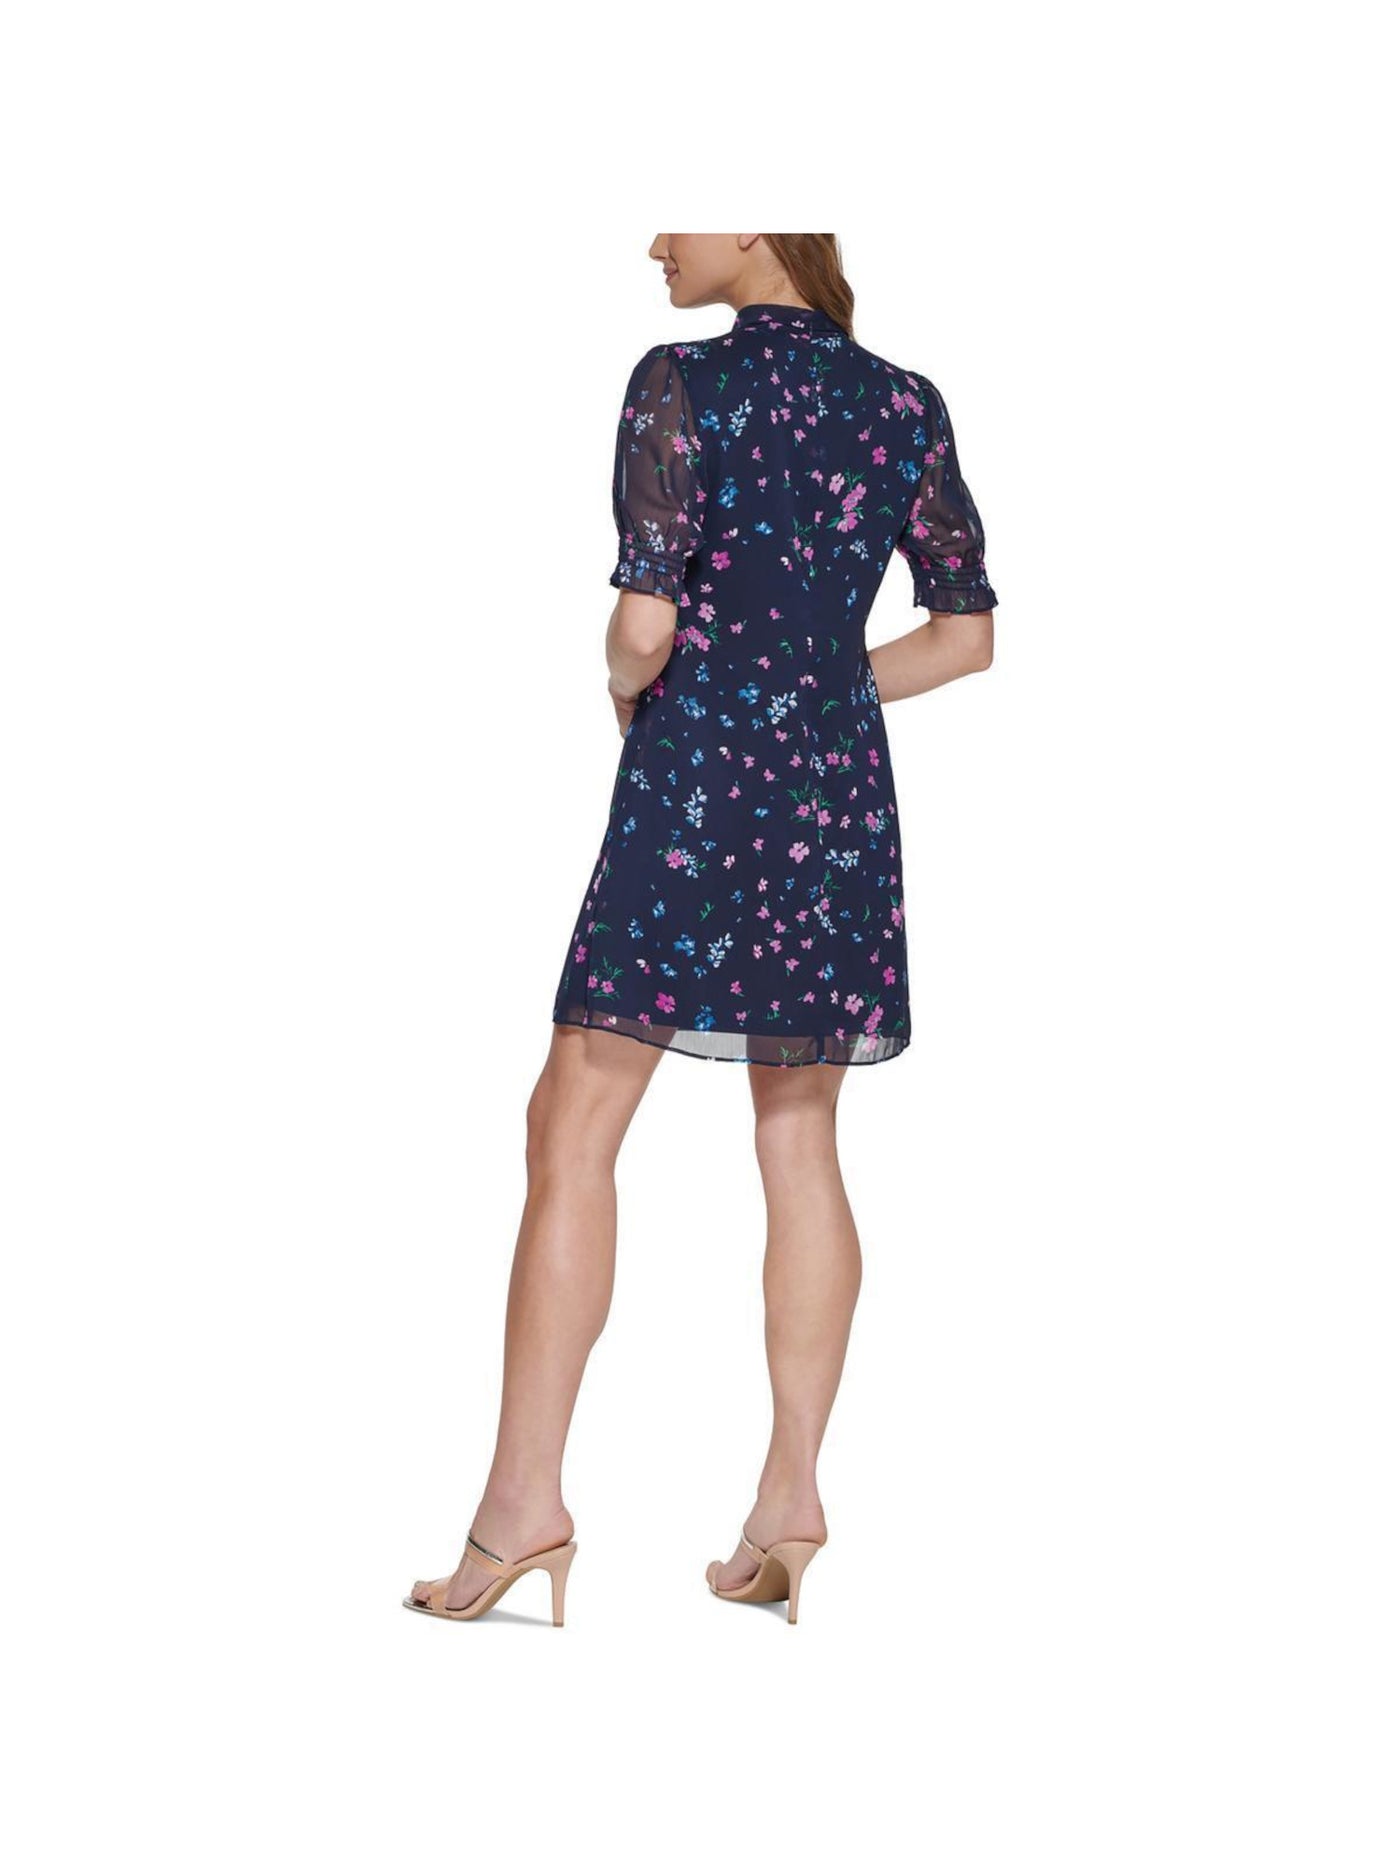 DKNY Womens Navy Zippered Smocked Ruffled Elastic-band Floral Pouf Sleeve Tie Neck Above The Knee Shift Dress 8